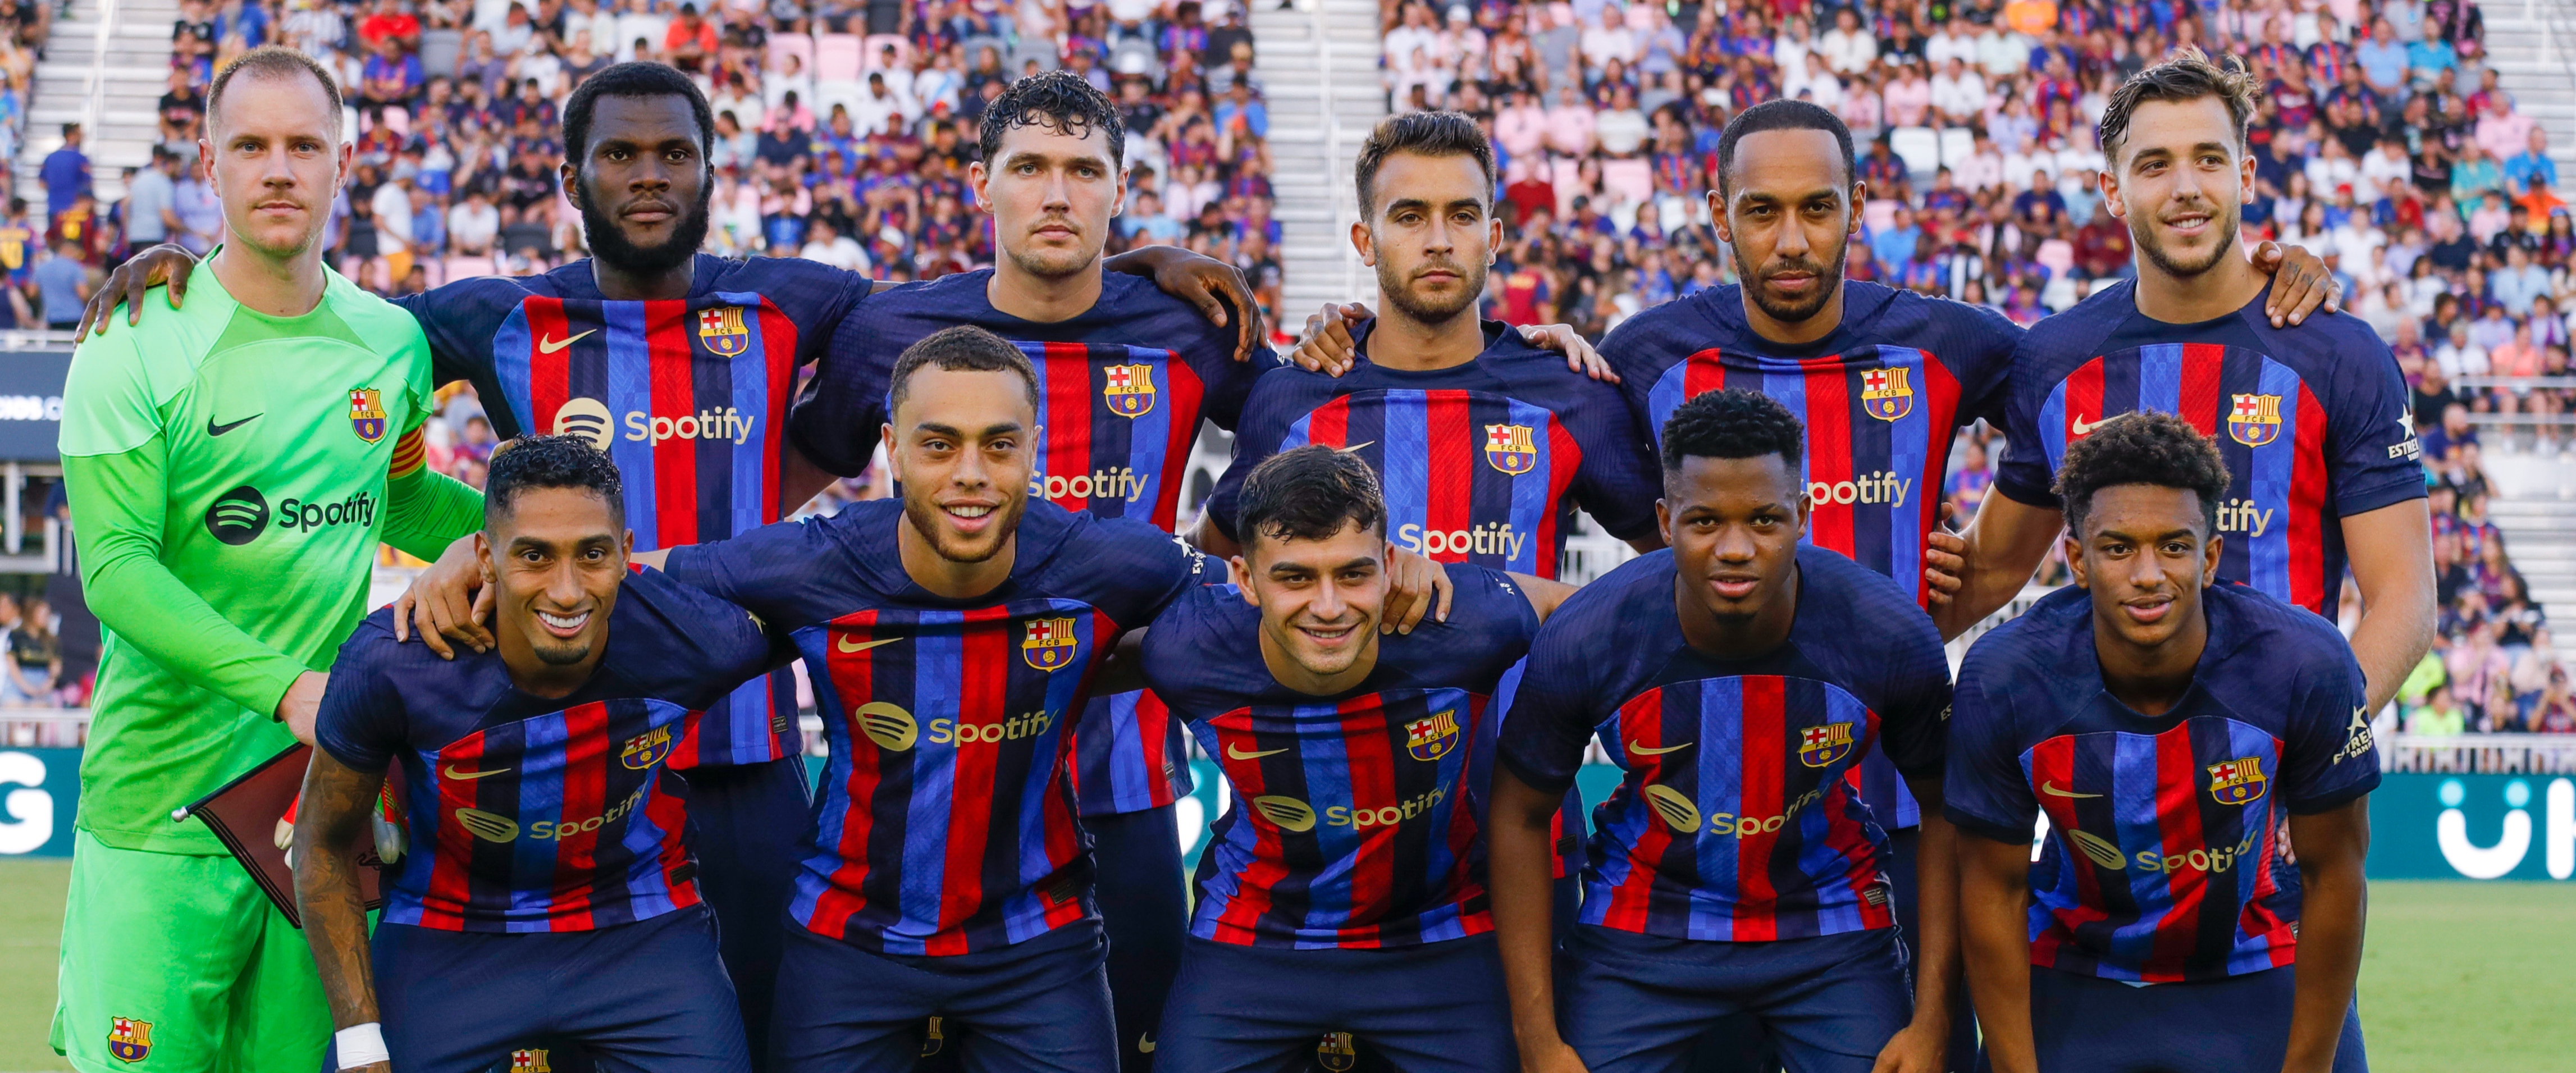 How is FC Barcelona buying players while $1 billion in debt?